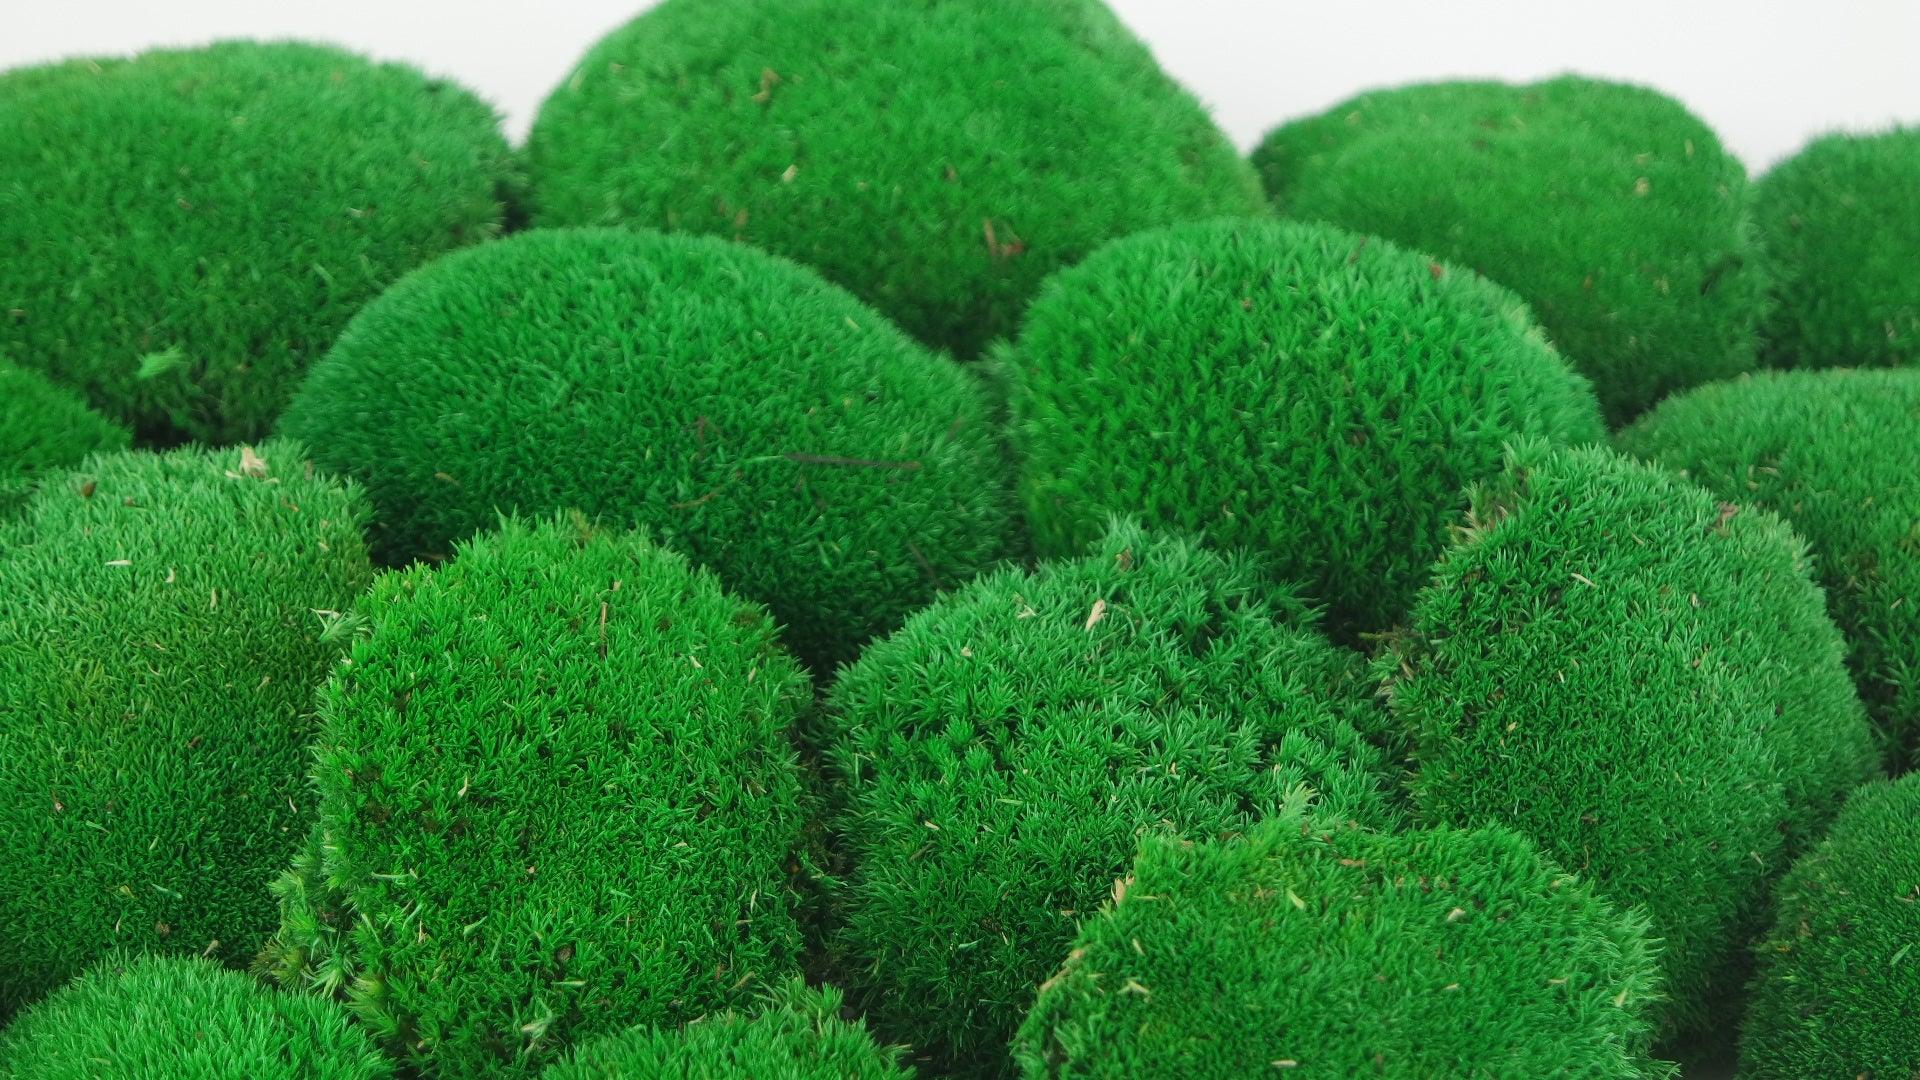 Ball Moss preserved bulk at wholesale price - Si-nature